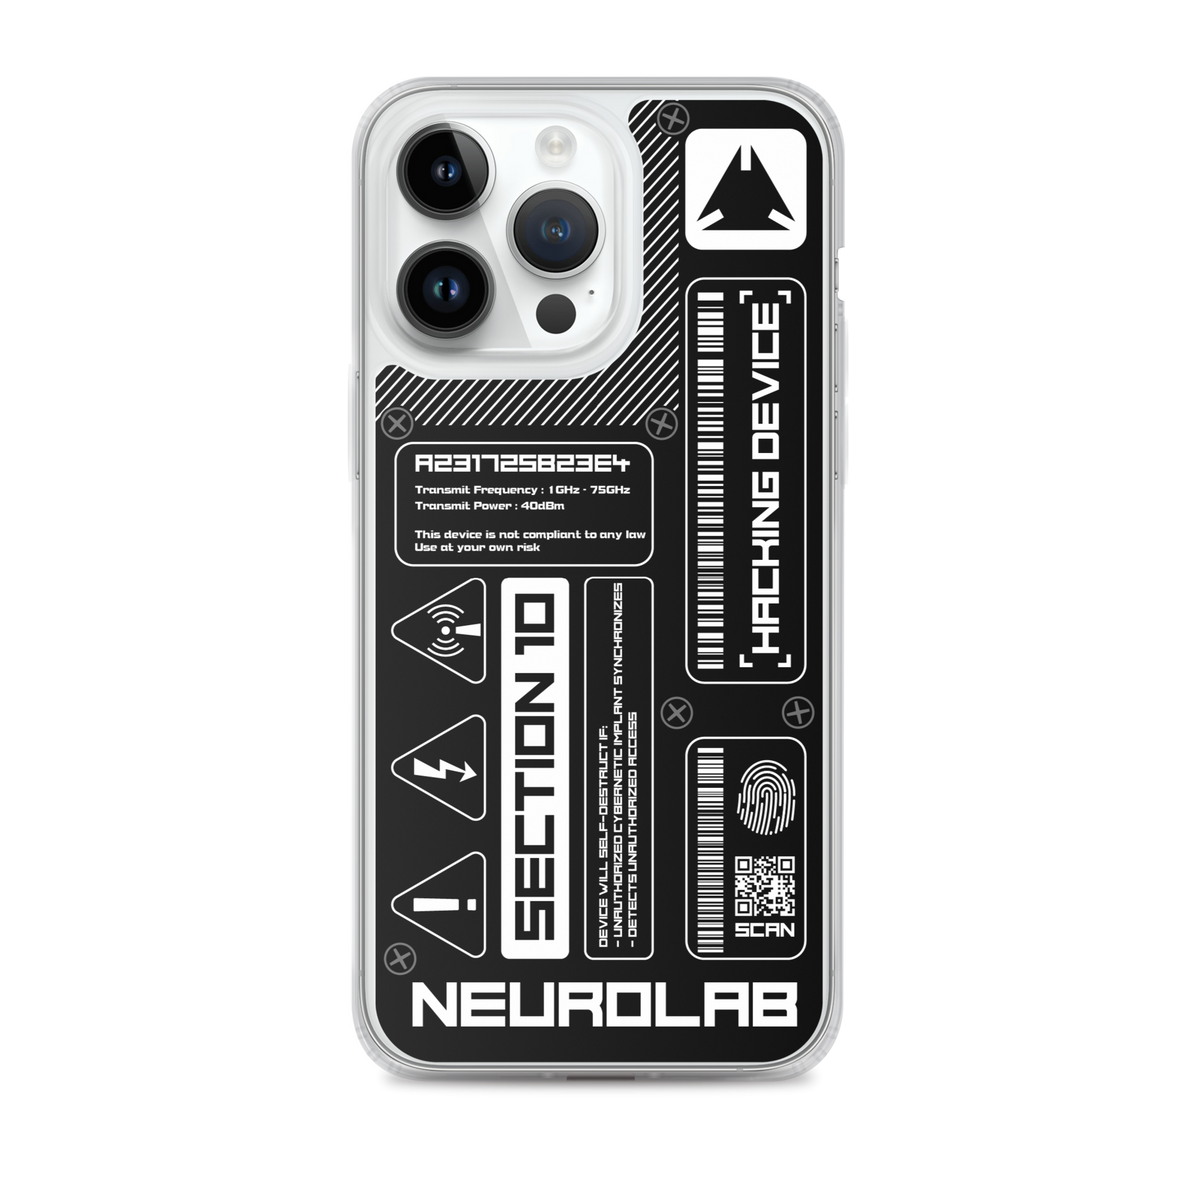  iPhone 11 Pro Max Hacker Rangers - Software Engineer  Programming Coding Case : Cell Phones & Accessories